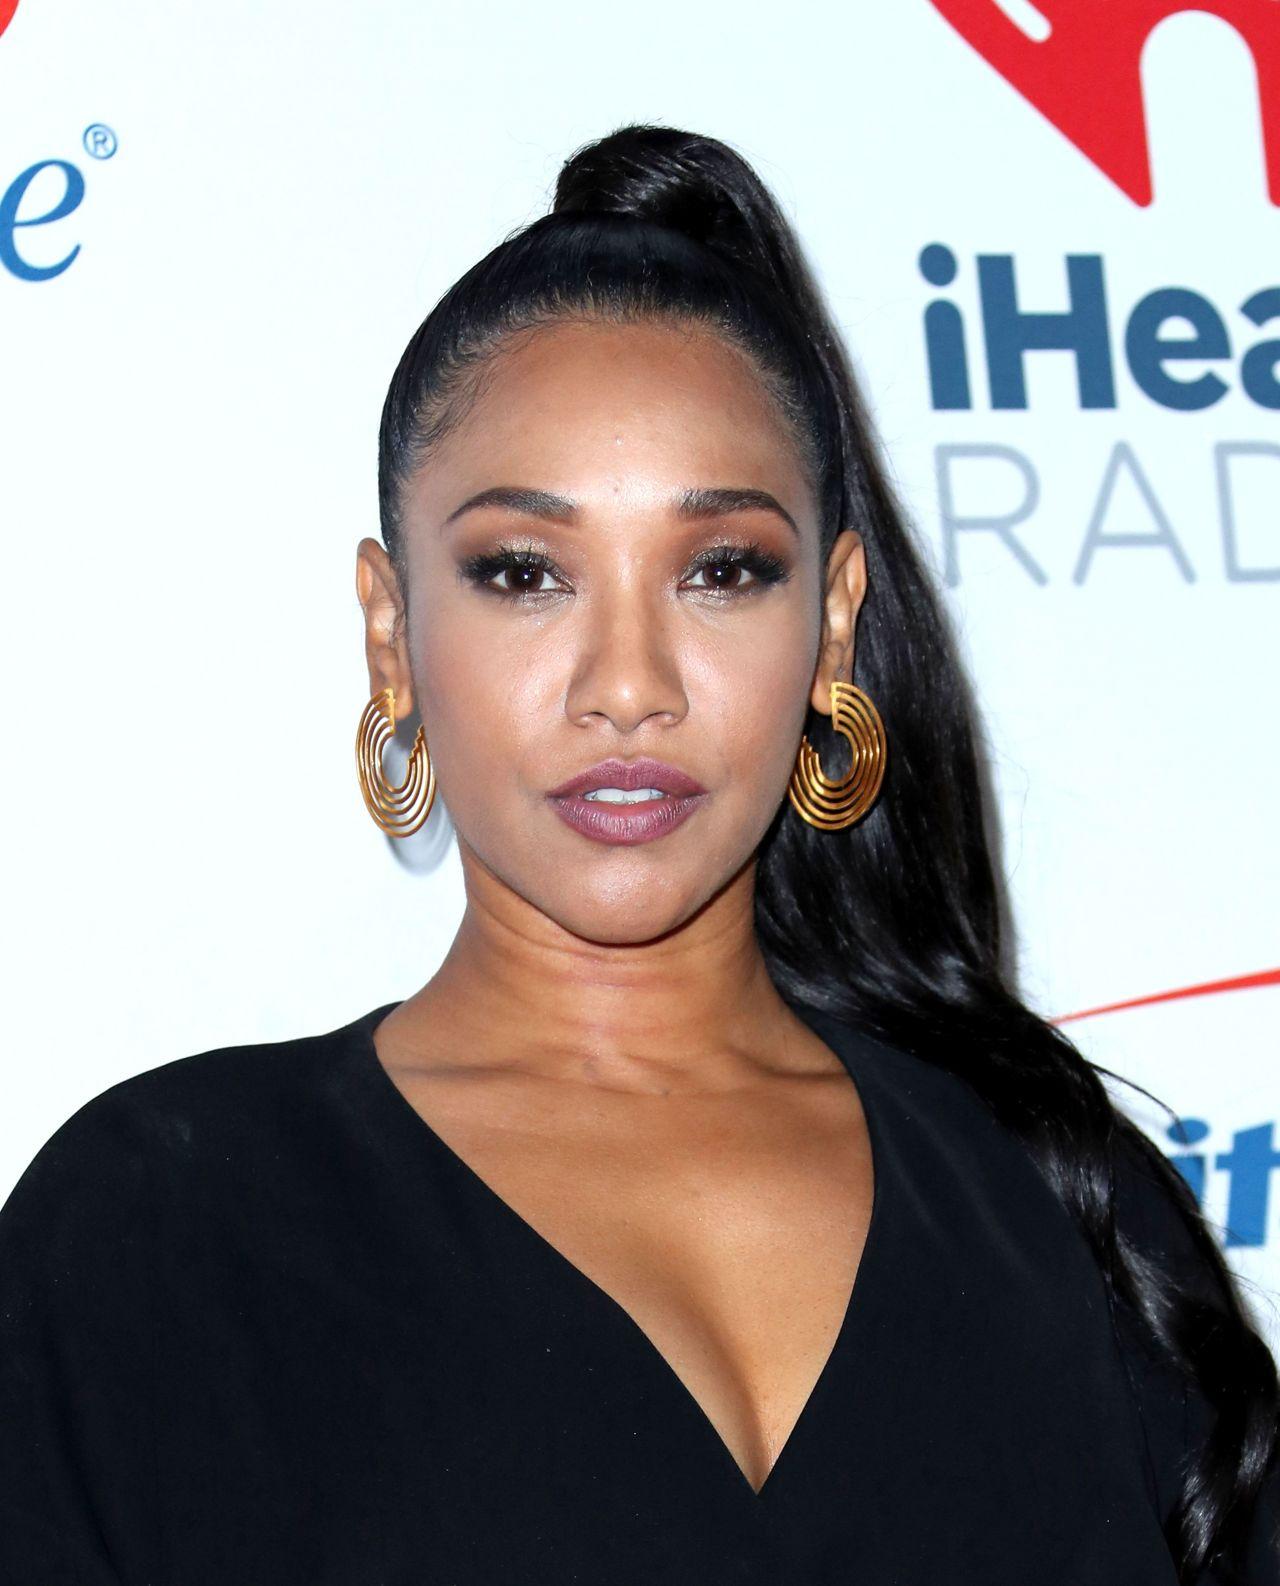 70+ Hot Pictures Of Candice Patton Who Plays Iris West In Flash TV Series 216